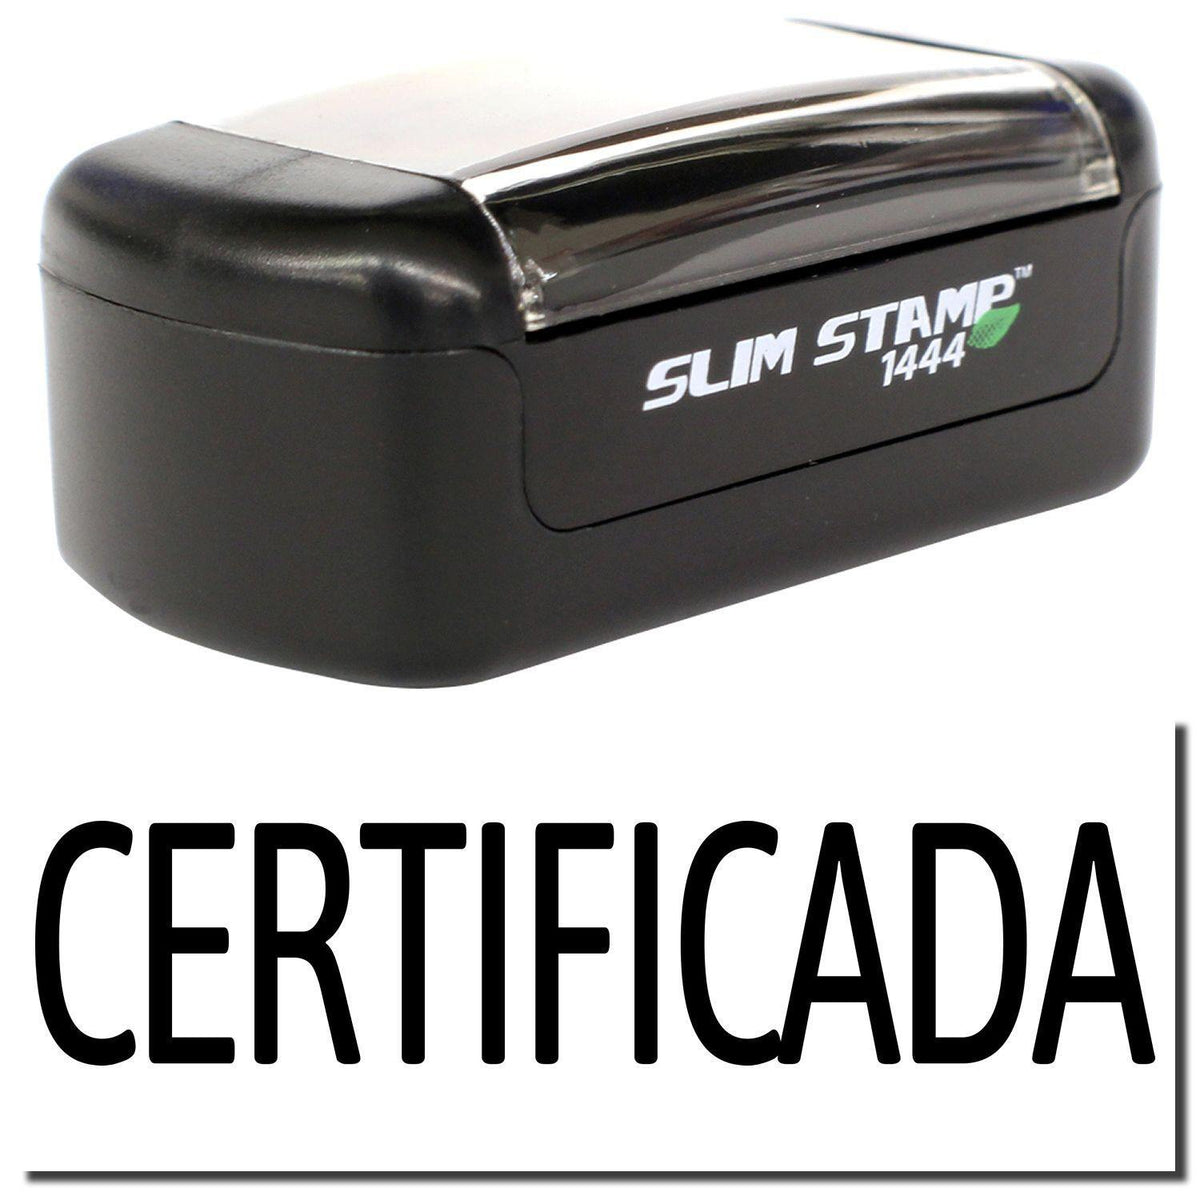 A stock office pre-inked stamp with a stamped image showing how the text &quot;CERTIFICADA&quot; is displayed after stamping.